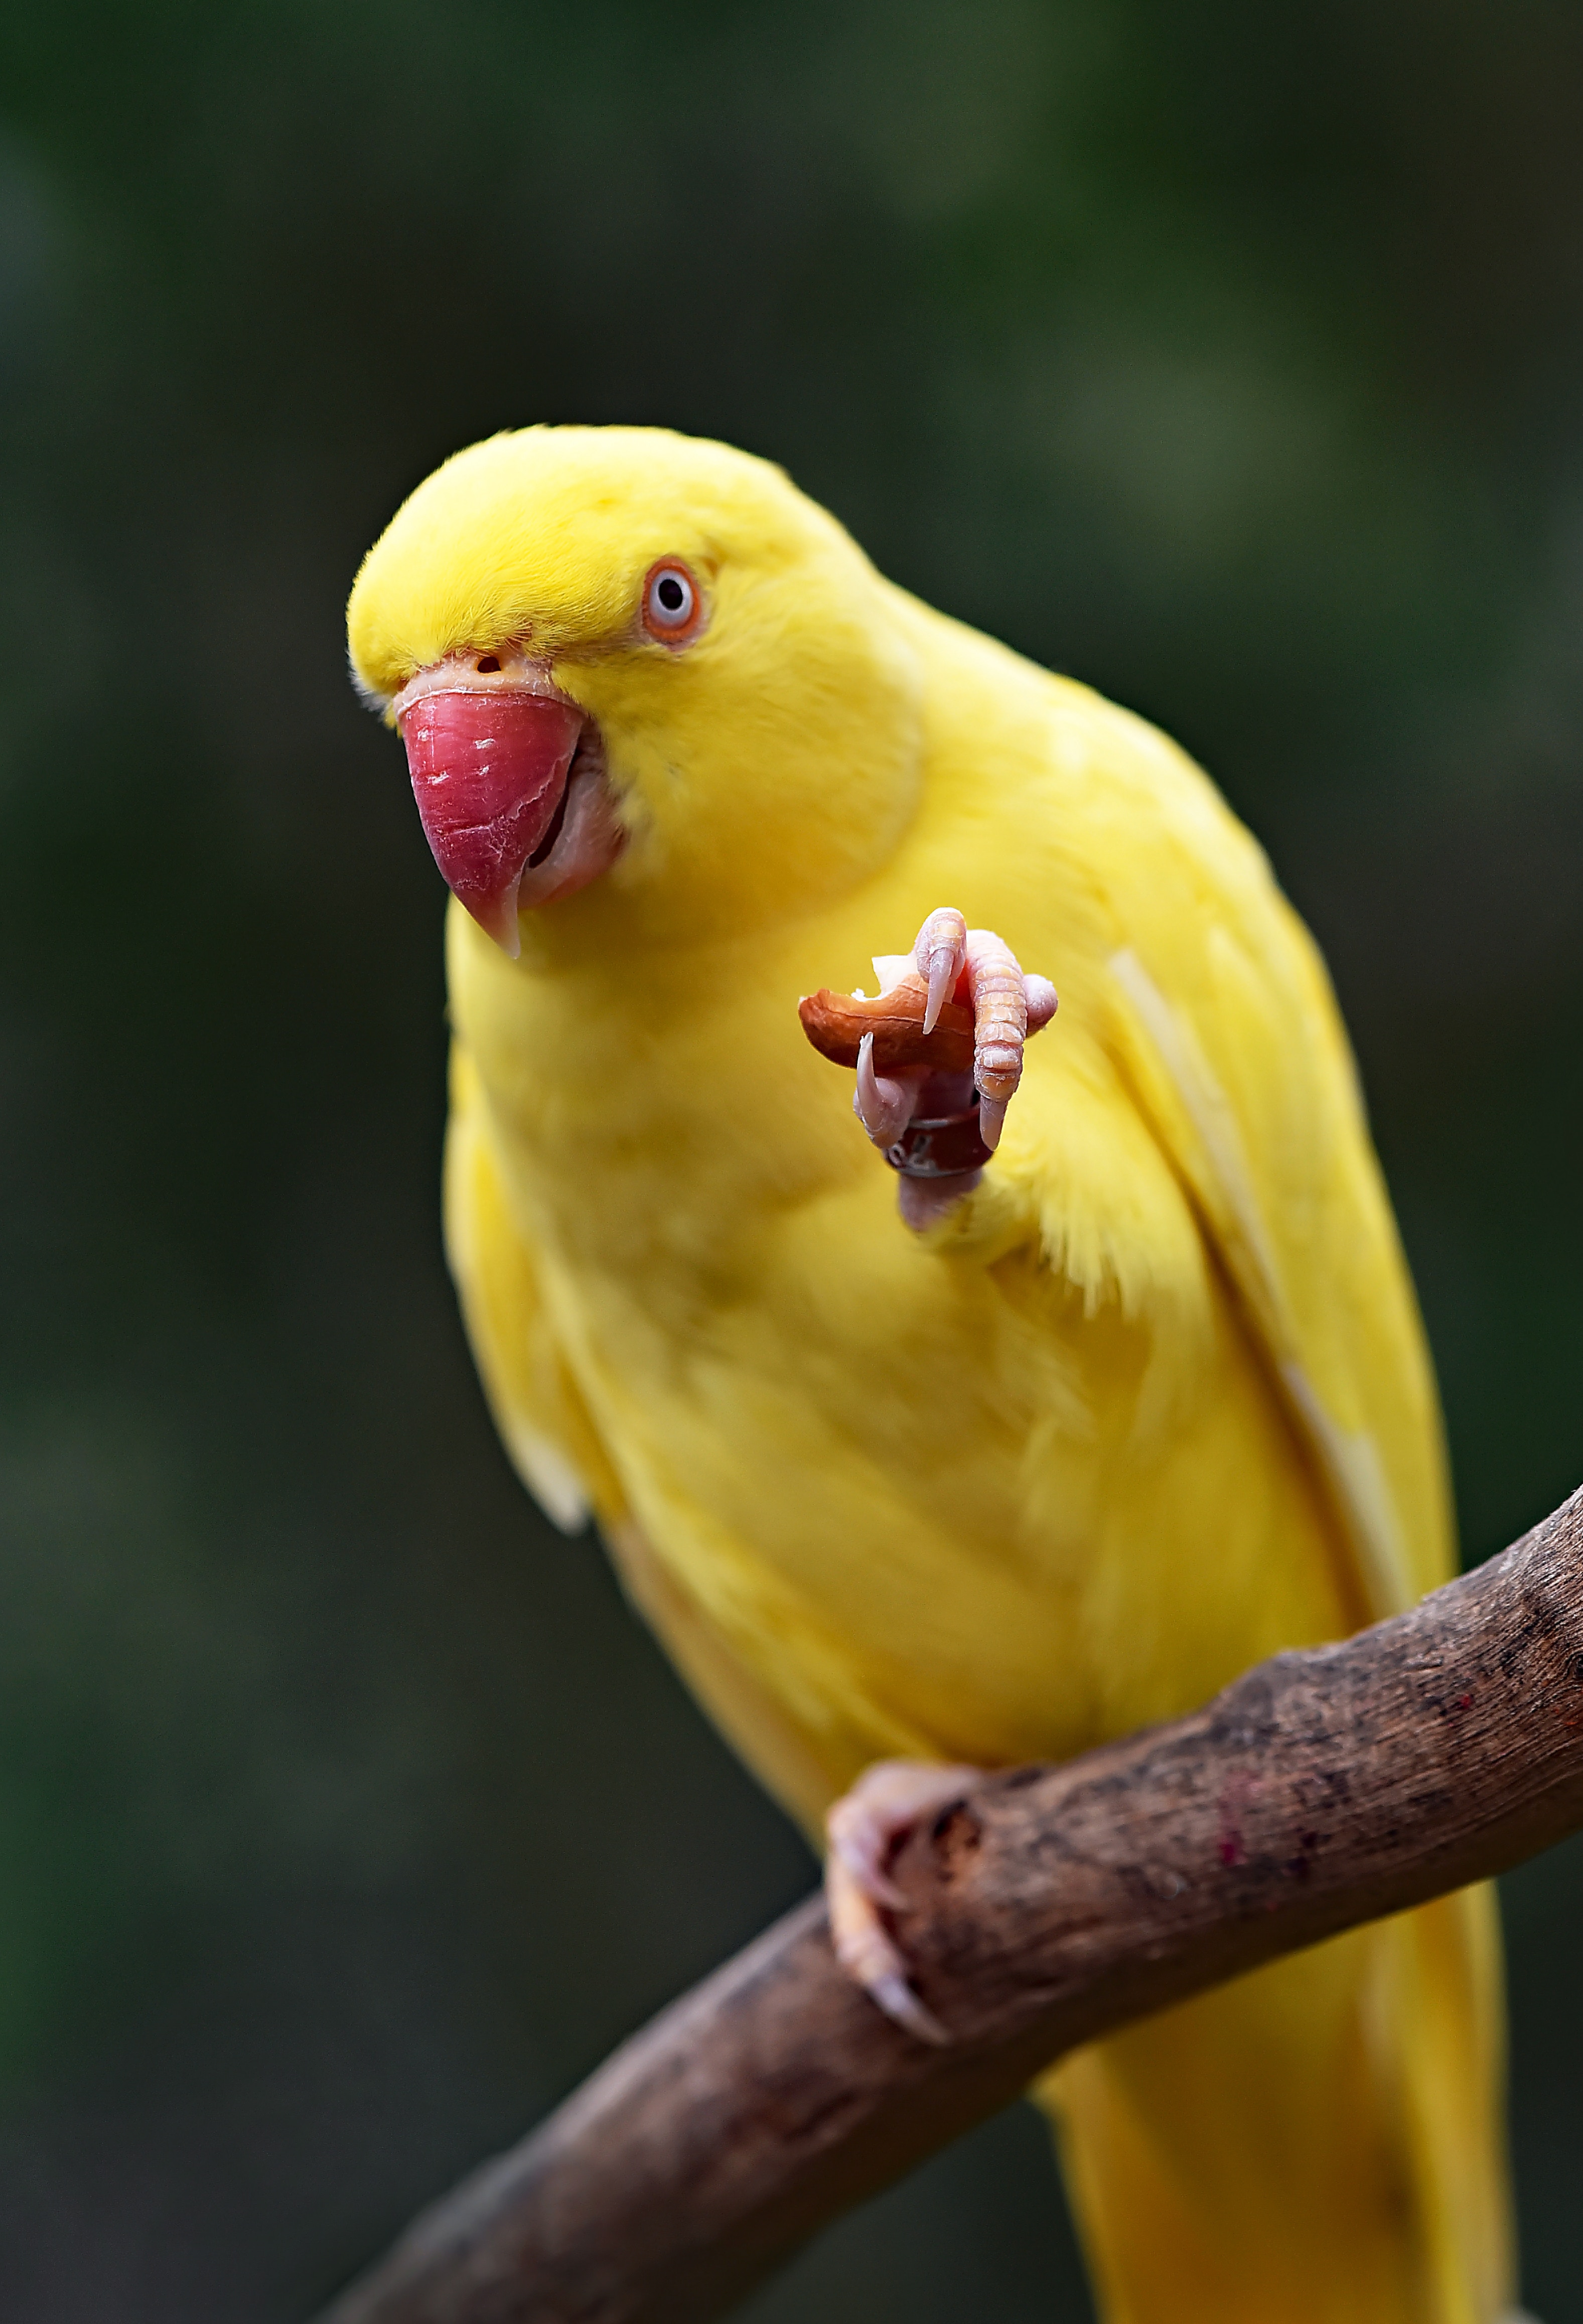 150955 download wallpaper bird, parrots, animals, yellow, beak screensavers and pictures for free